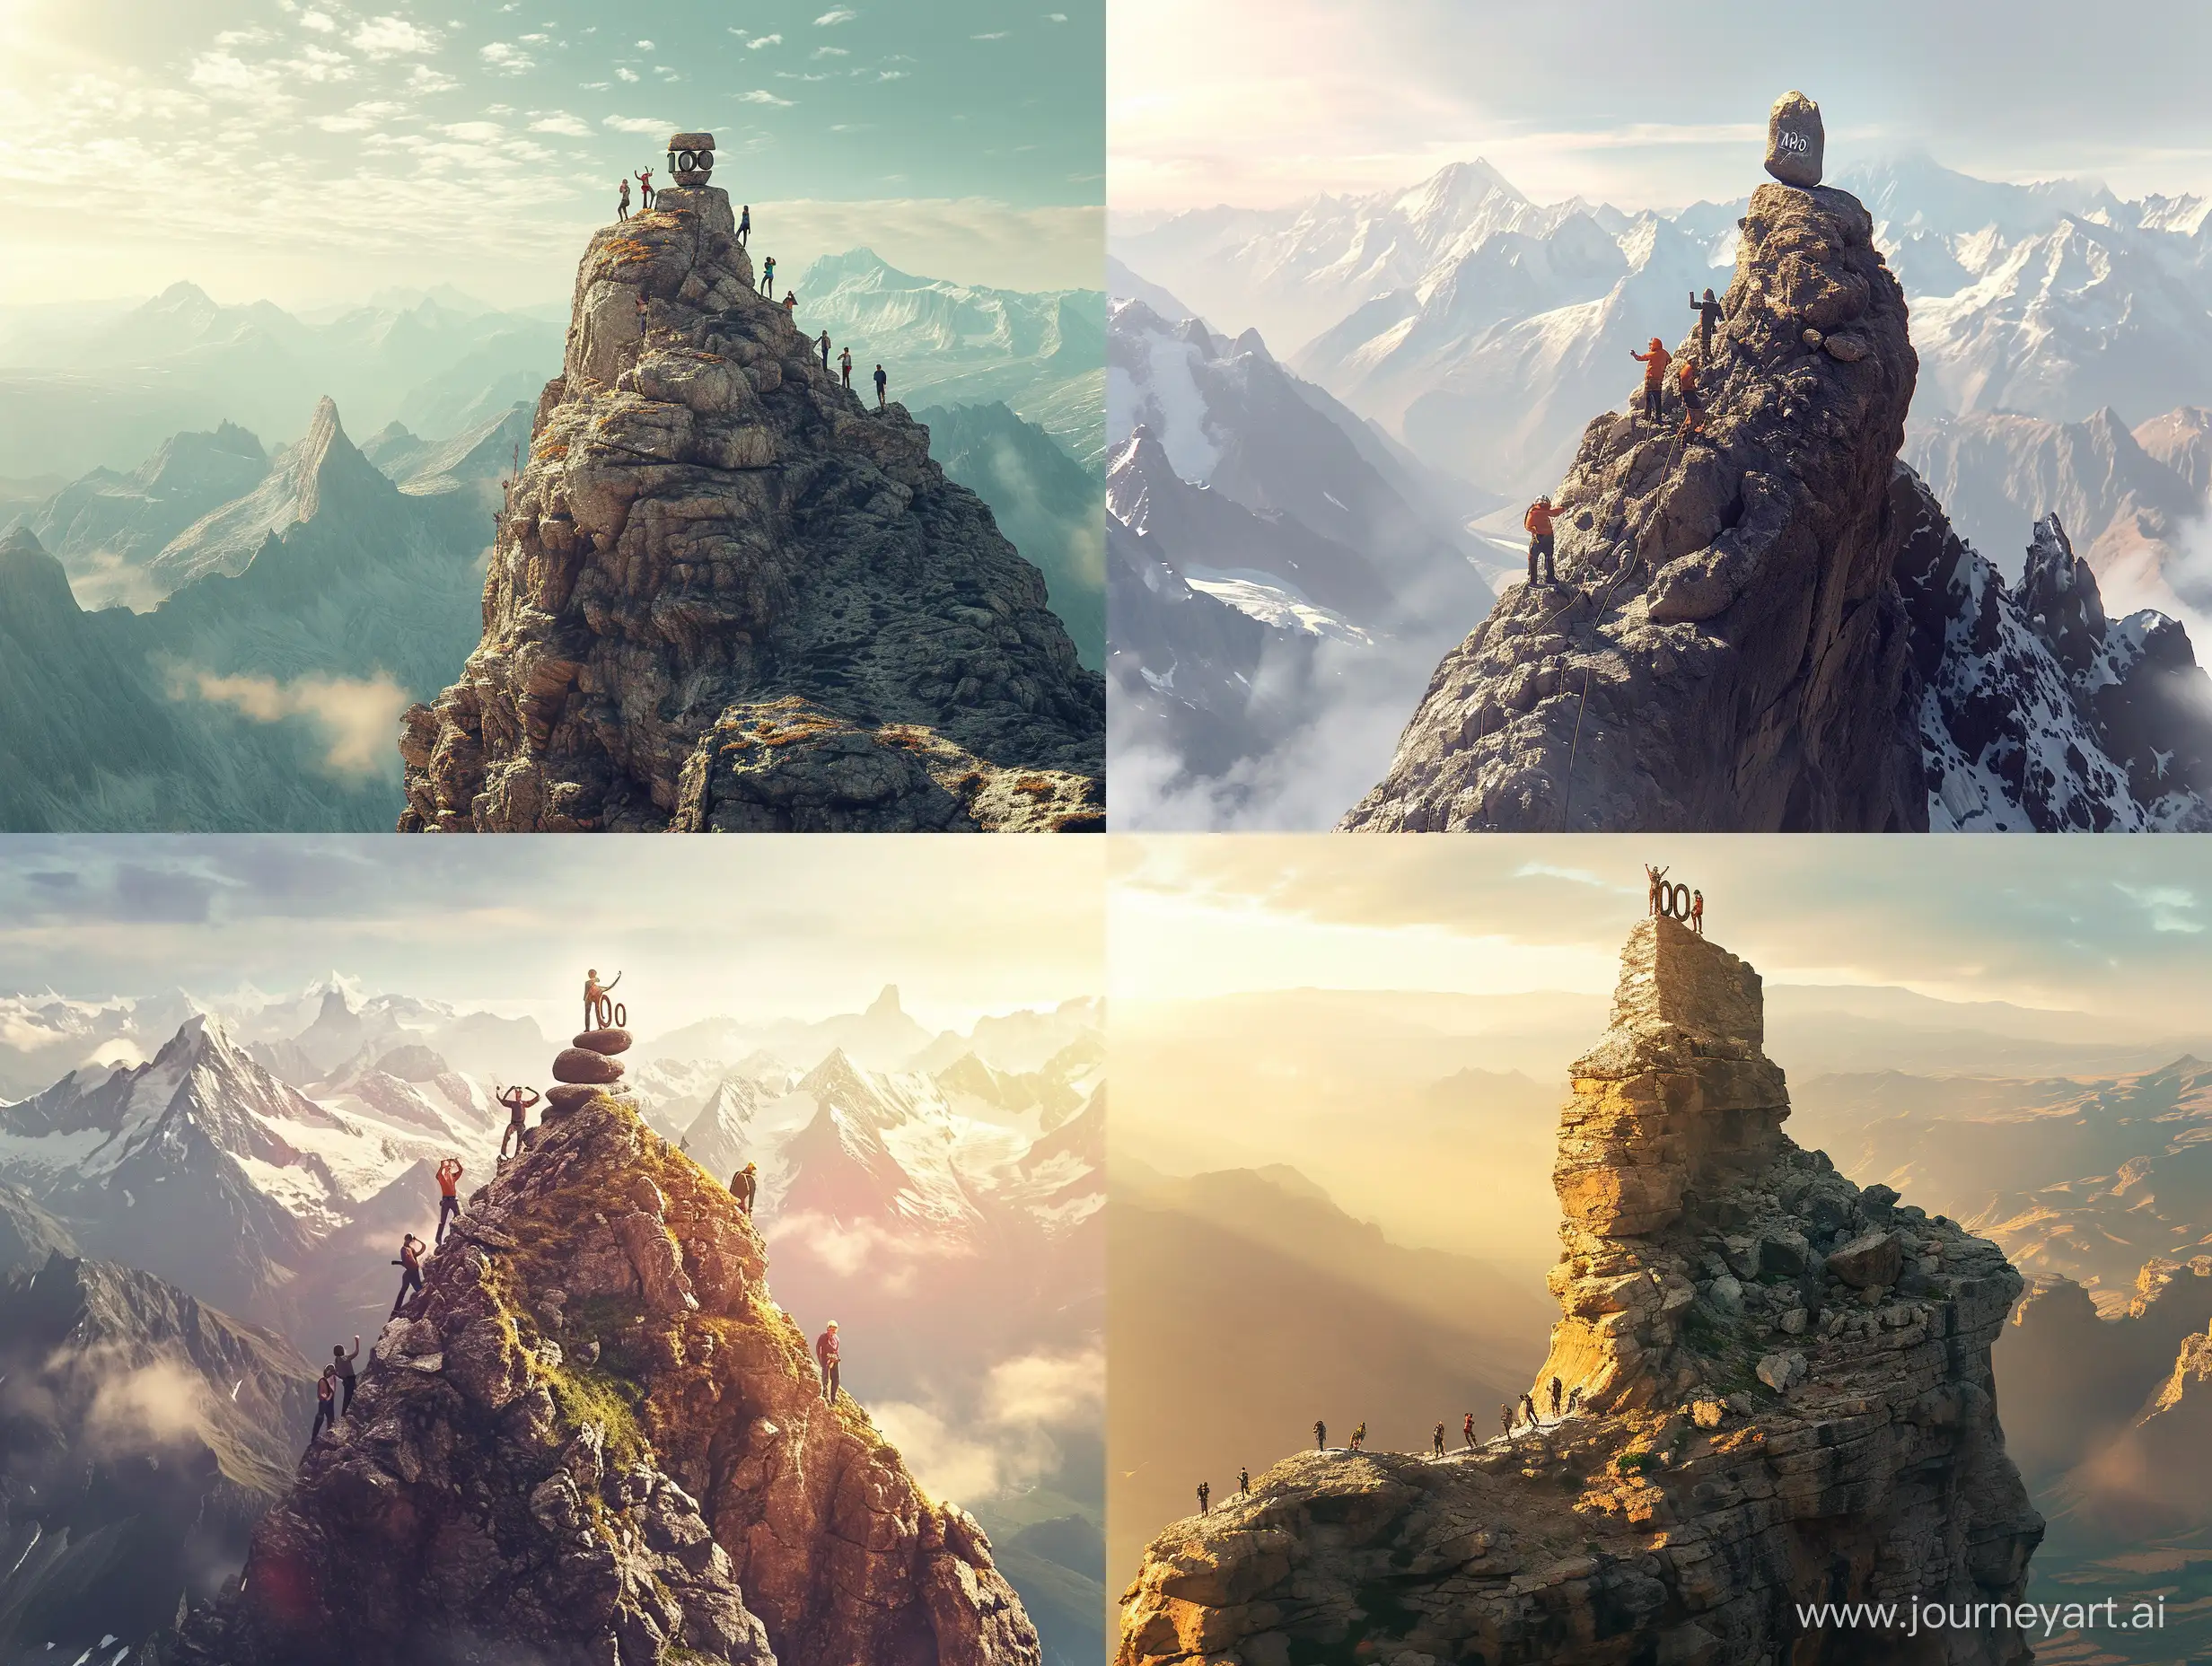 Realistic, Canon EOS 5d, a group of people are trying to climb a high mountain, standing on the top of the mountain to celebrate, the top stone is a rock in the shape of the number "1000", and there are higher distant mountains, realistic, accurate depiction, soft light, realistic sunshine